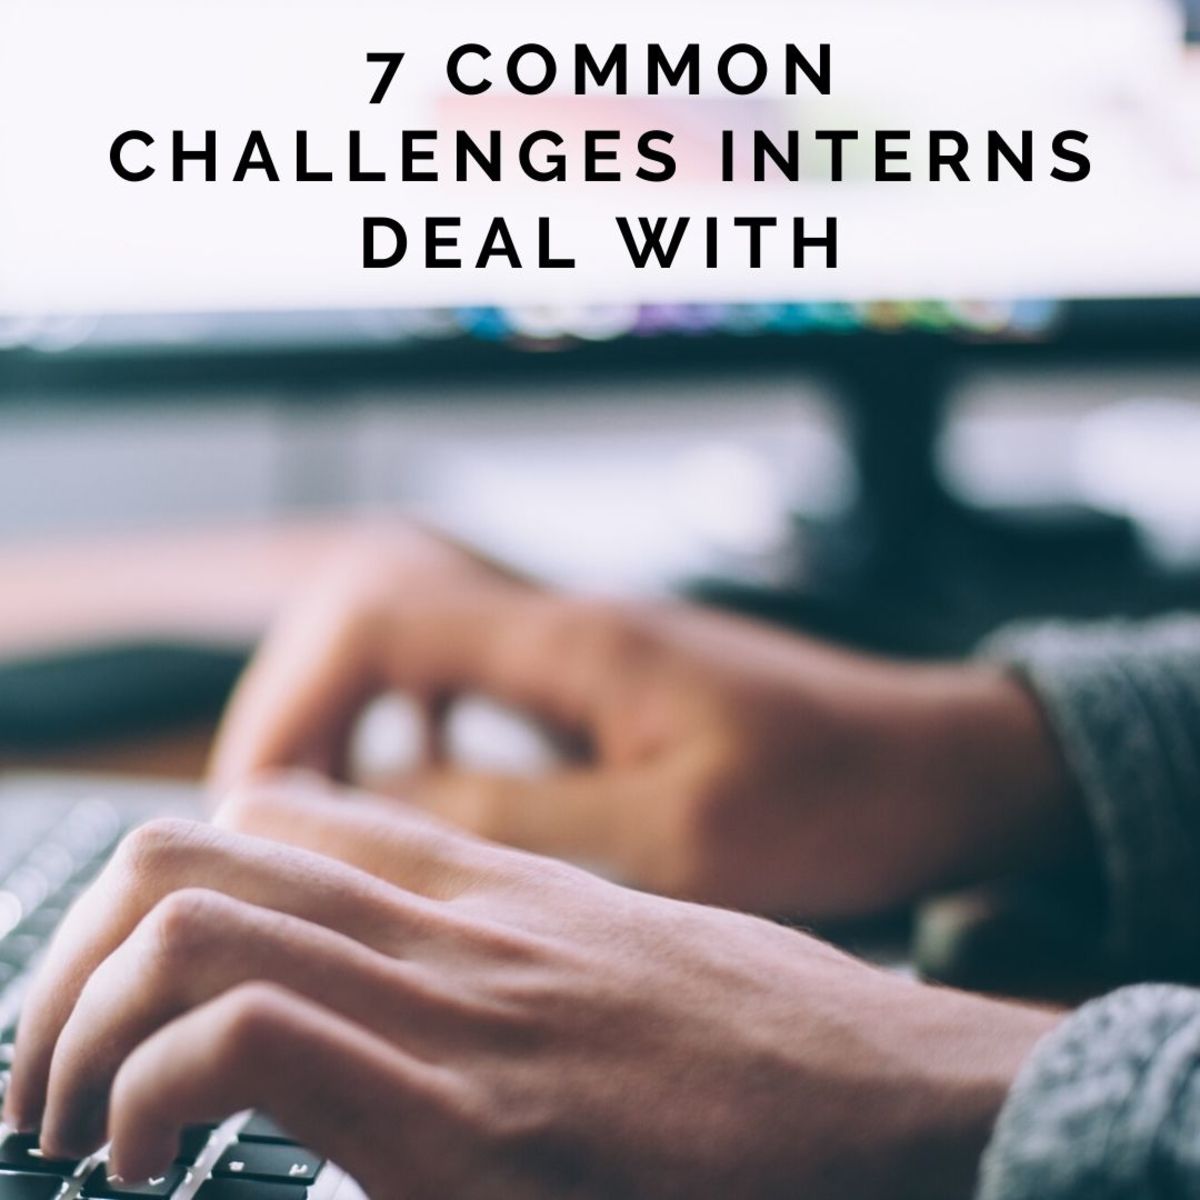 Here are seven common challenges interns are faced with.